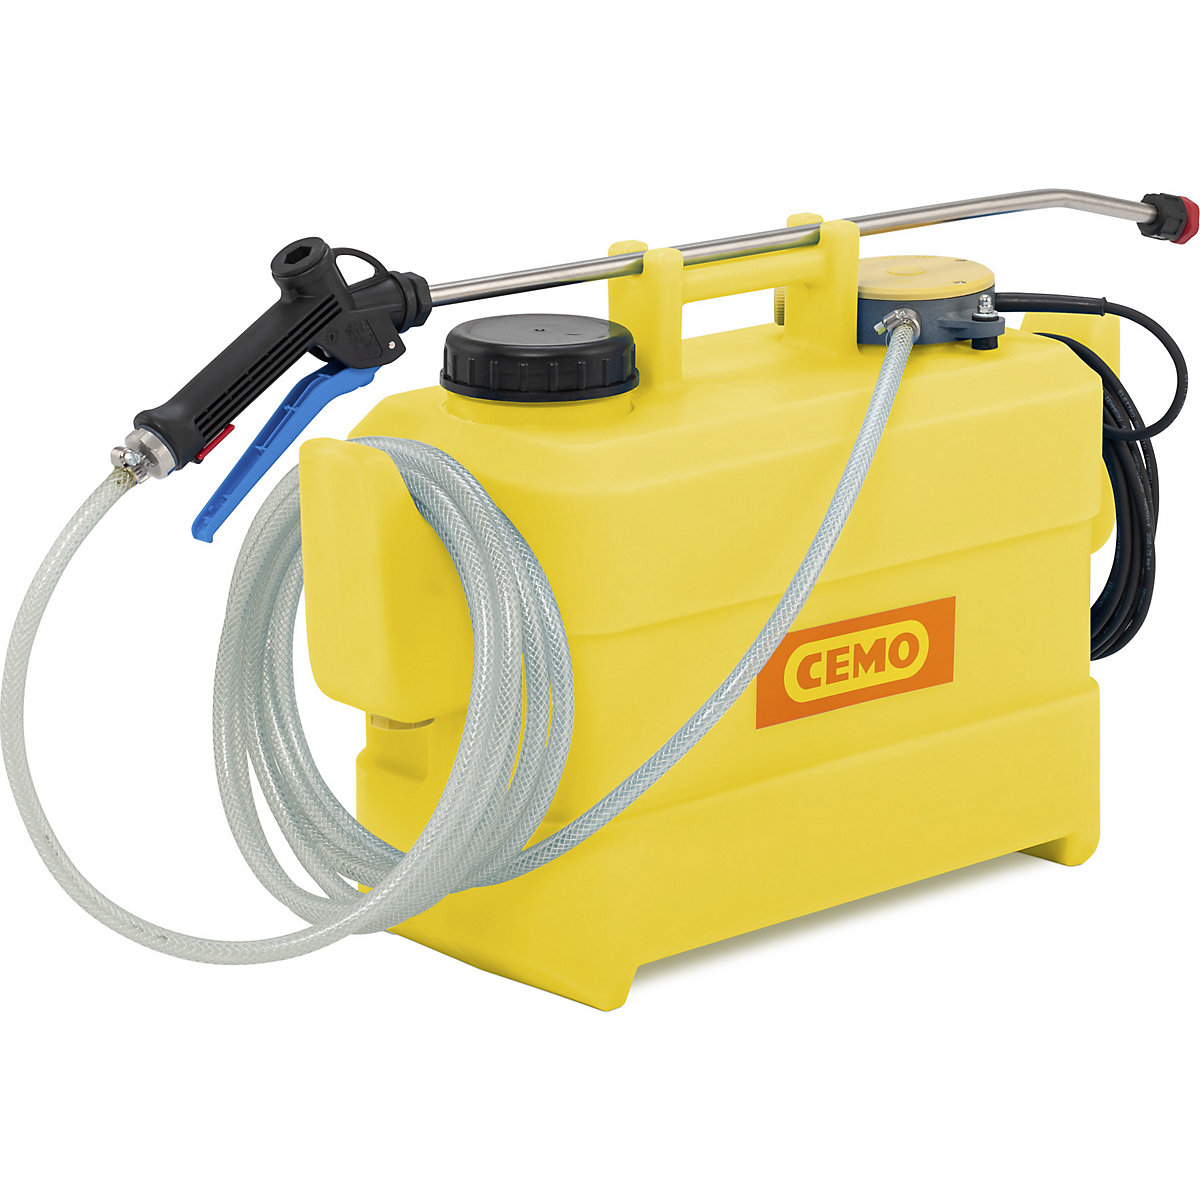 Electric sprayer with container for disinfectant solutions – CEMO